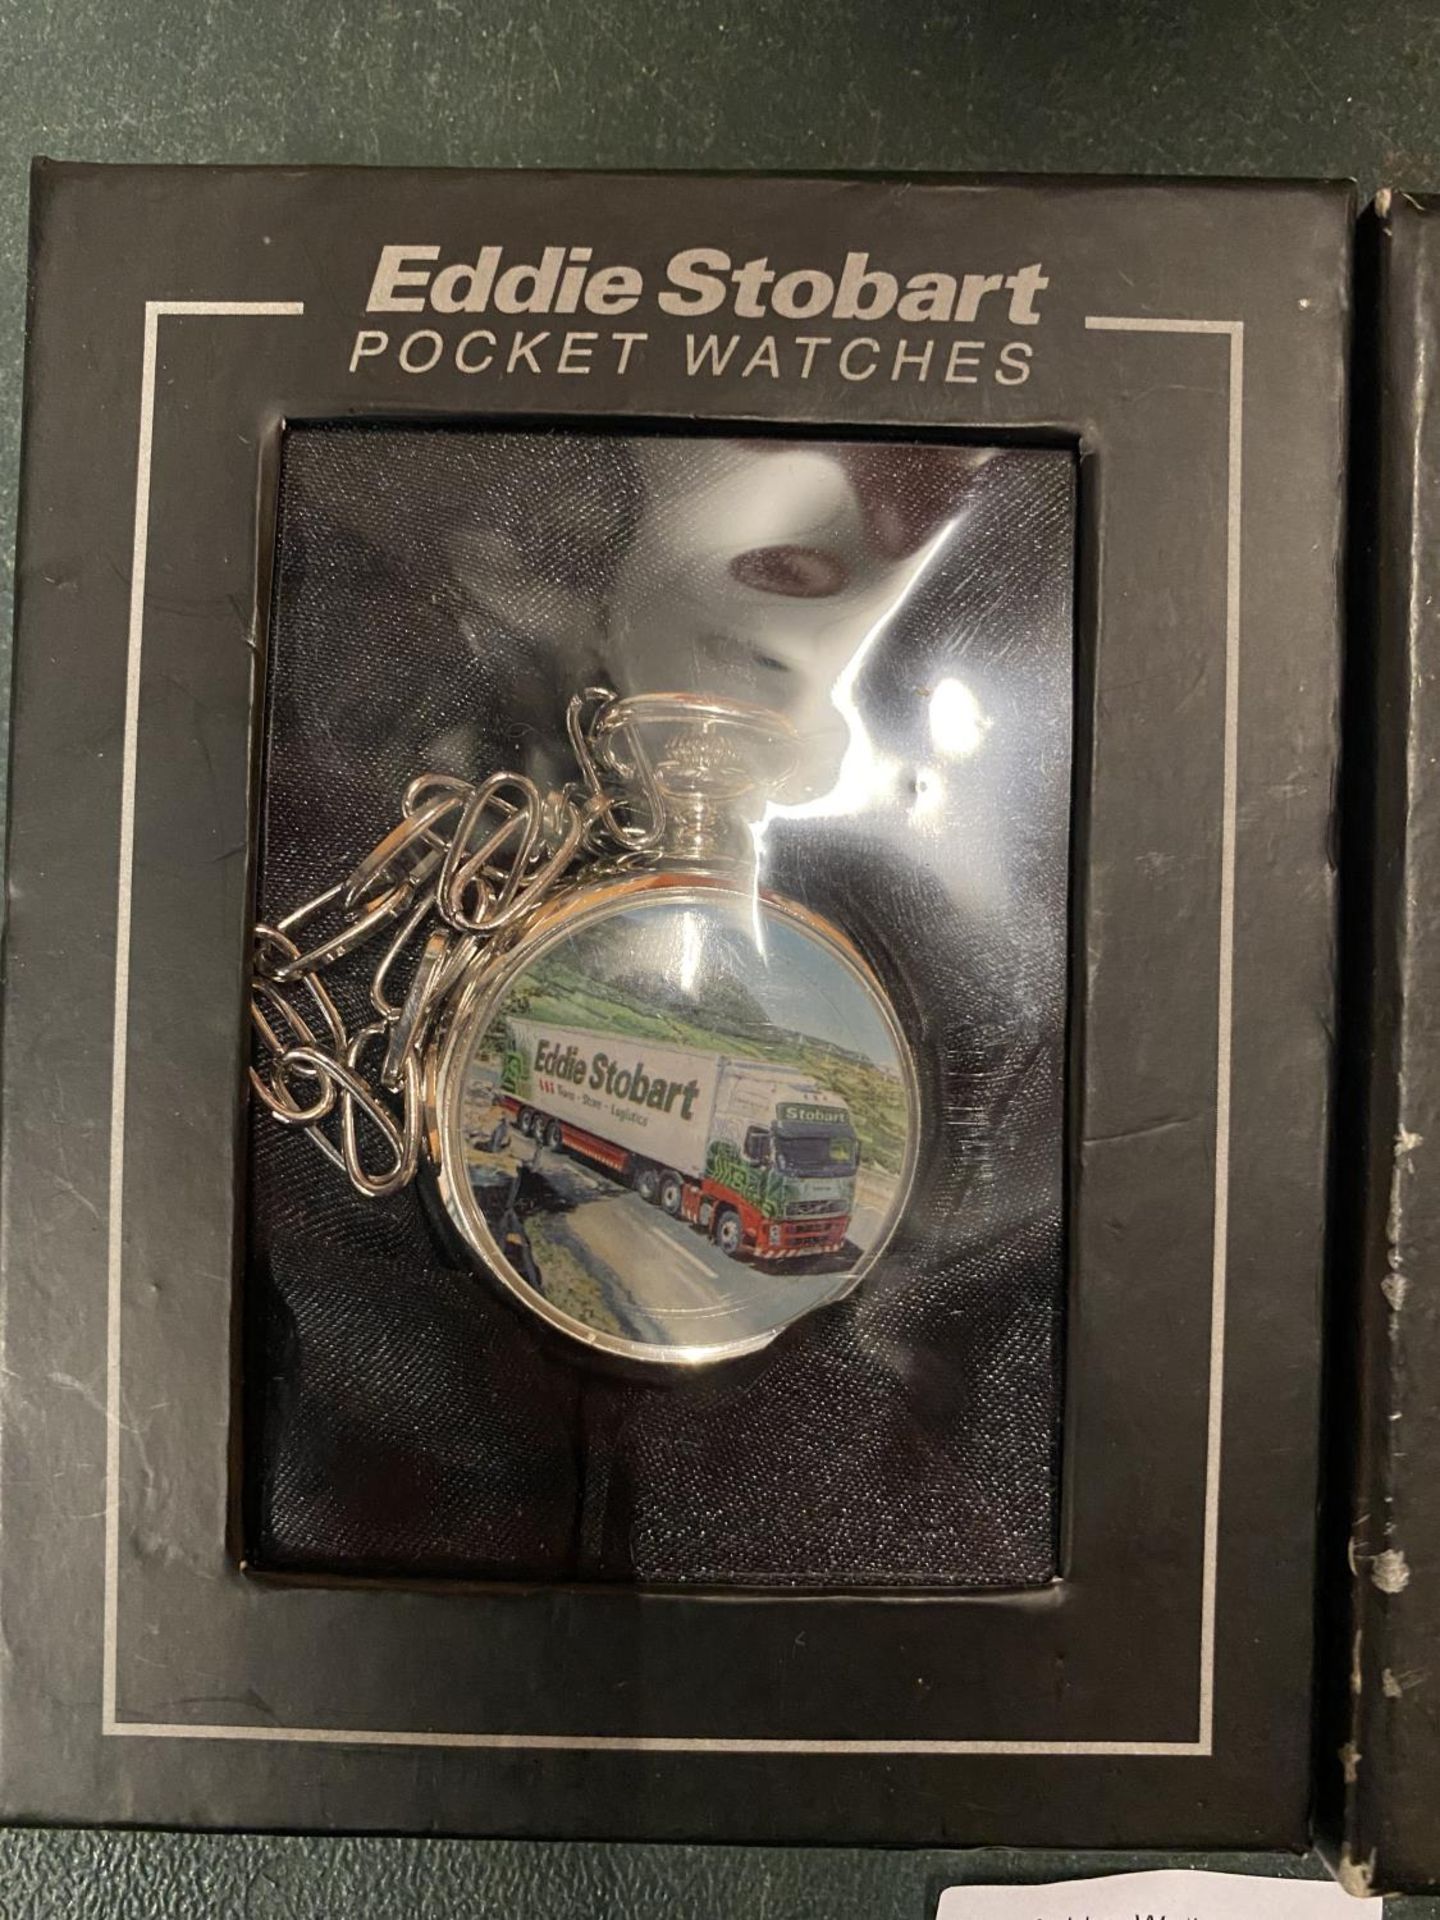 TWO BOXED POCKET WATCHES, ONE WITH AN EDDIE STOBART LORRY AND ONE WITH A CLASSIC CAR - Image 2 of 3